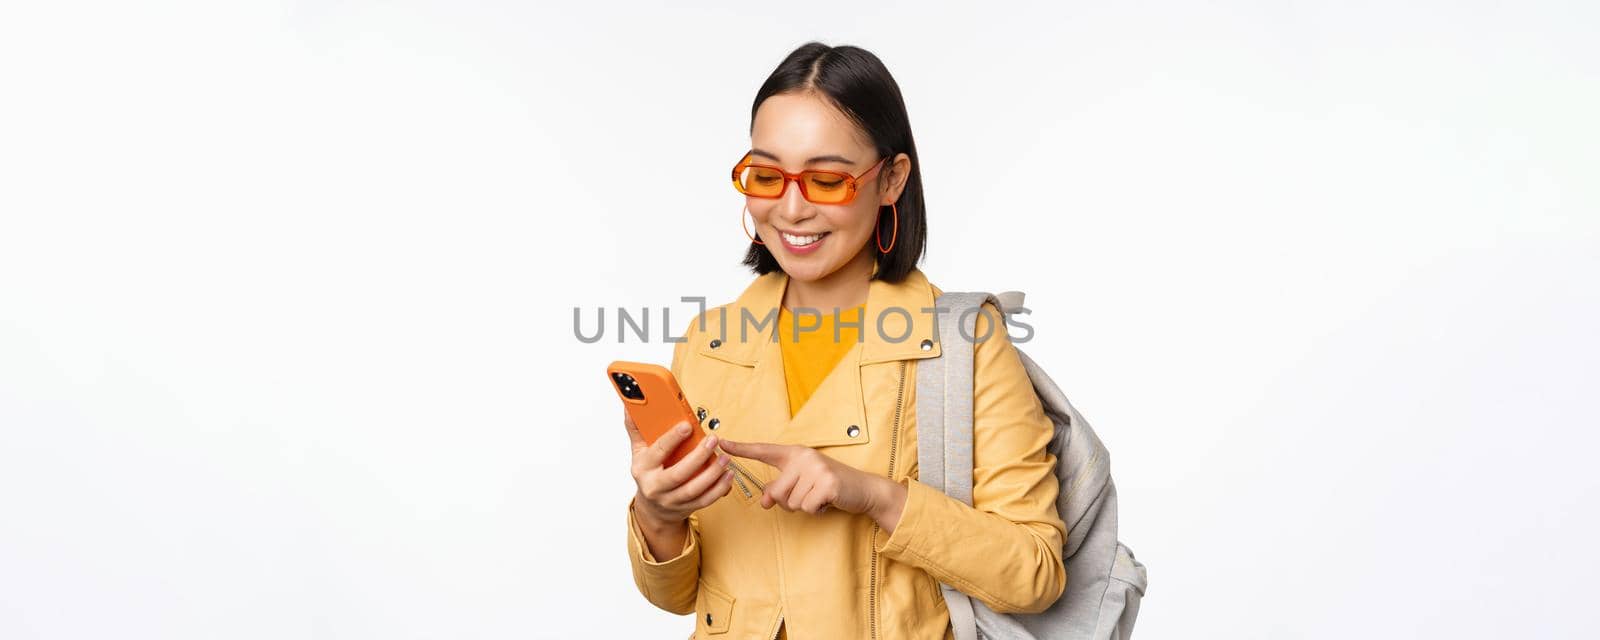 Stylish young asian woman tourist, traveller with backpack and smartphone smiling at camera, posing against white background. Copy space